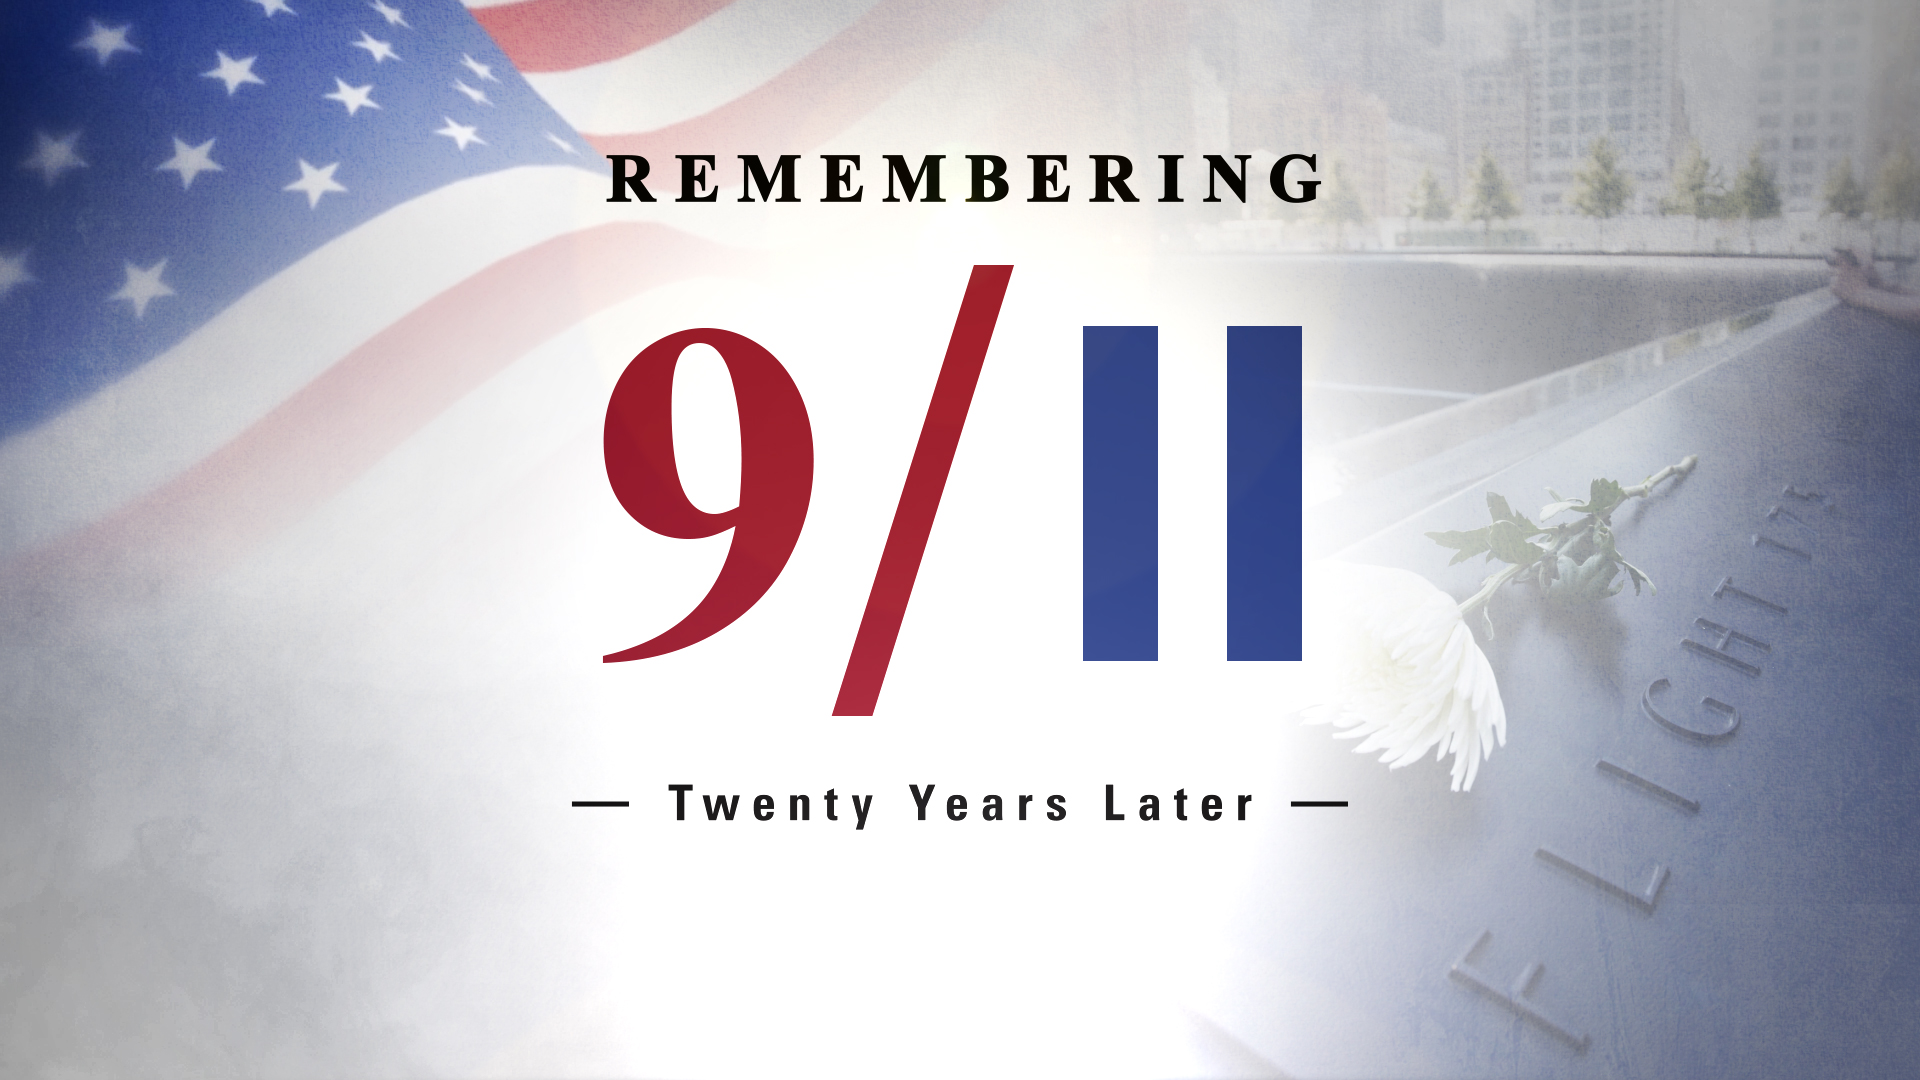 America remembers the 9/11 attacks: 20 years later